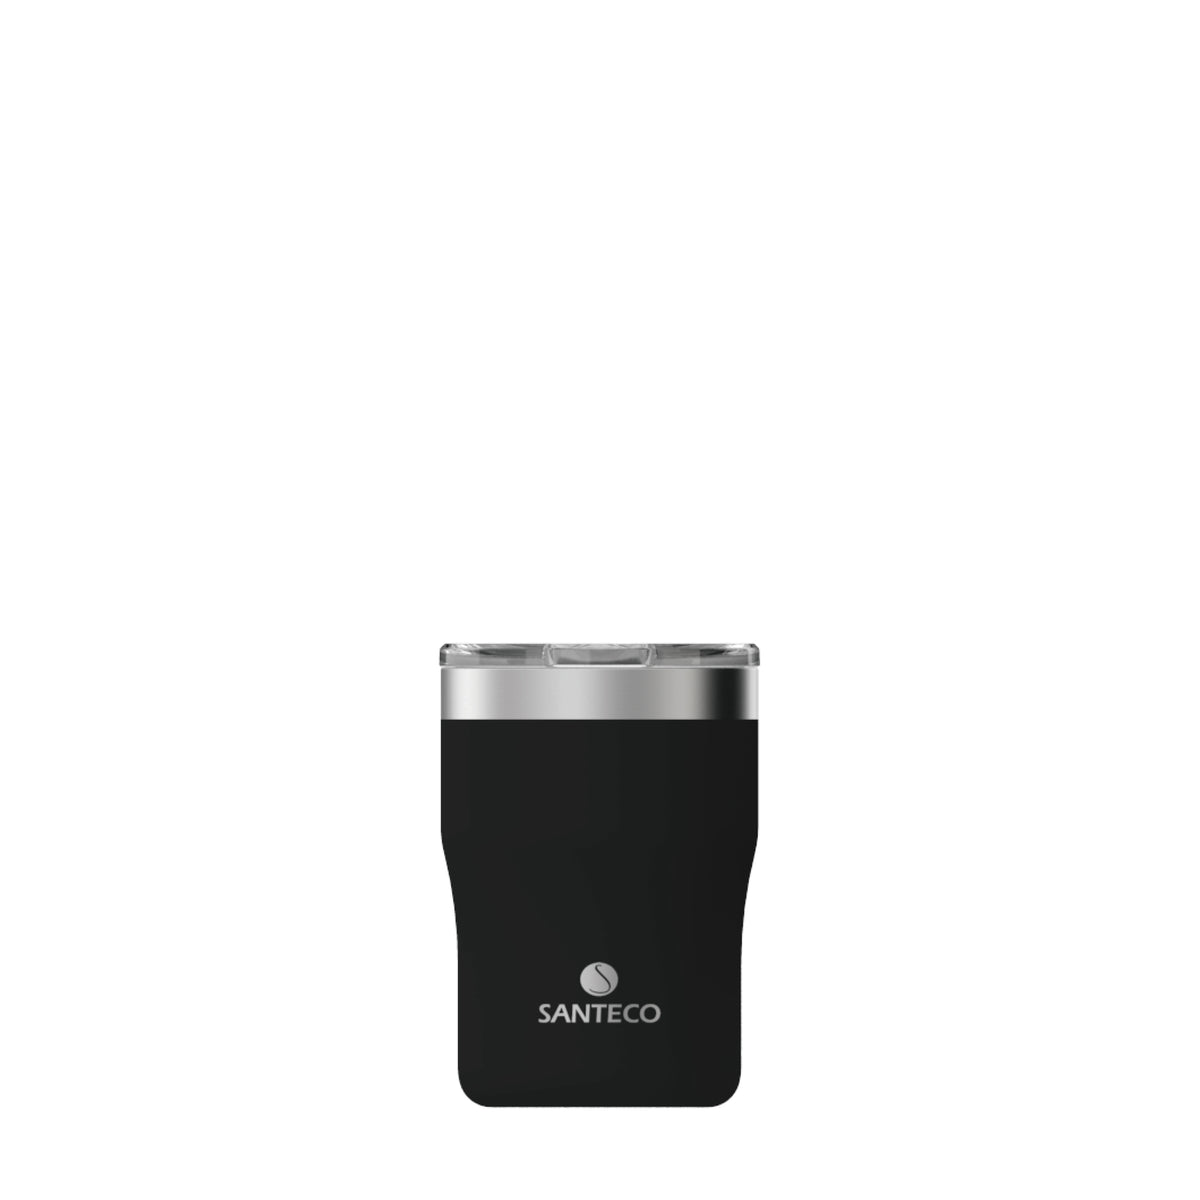 SANTECO Nora 10 oz, Thermal Tumbler, Stainless Steel, Vacuum Insulated